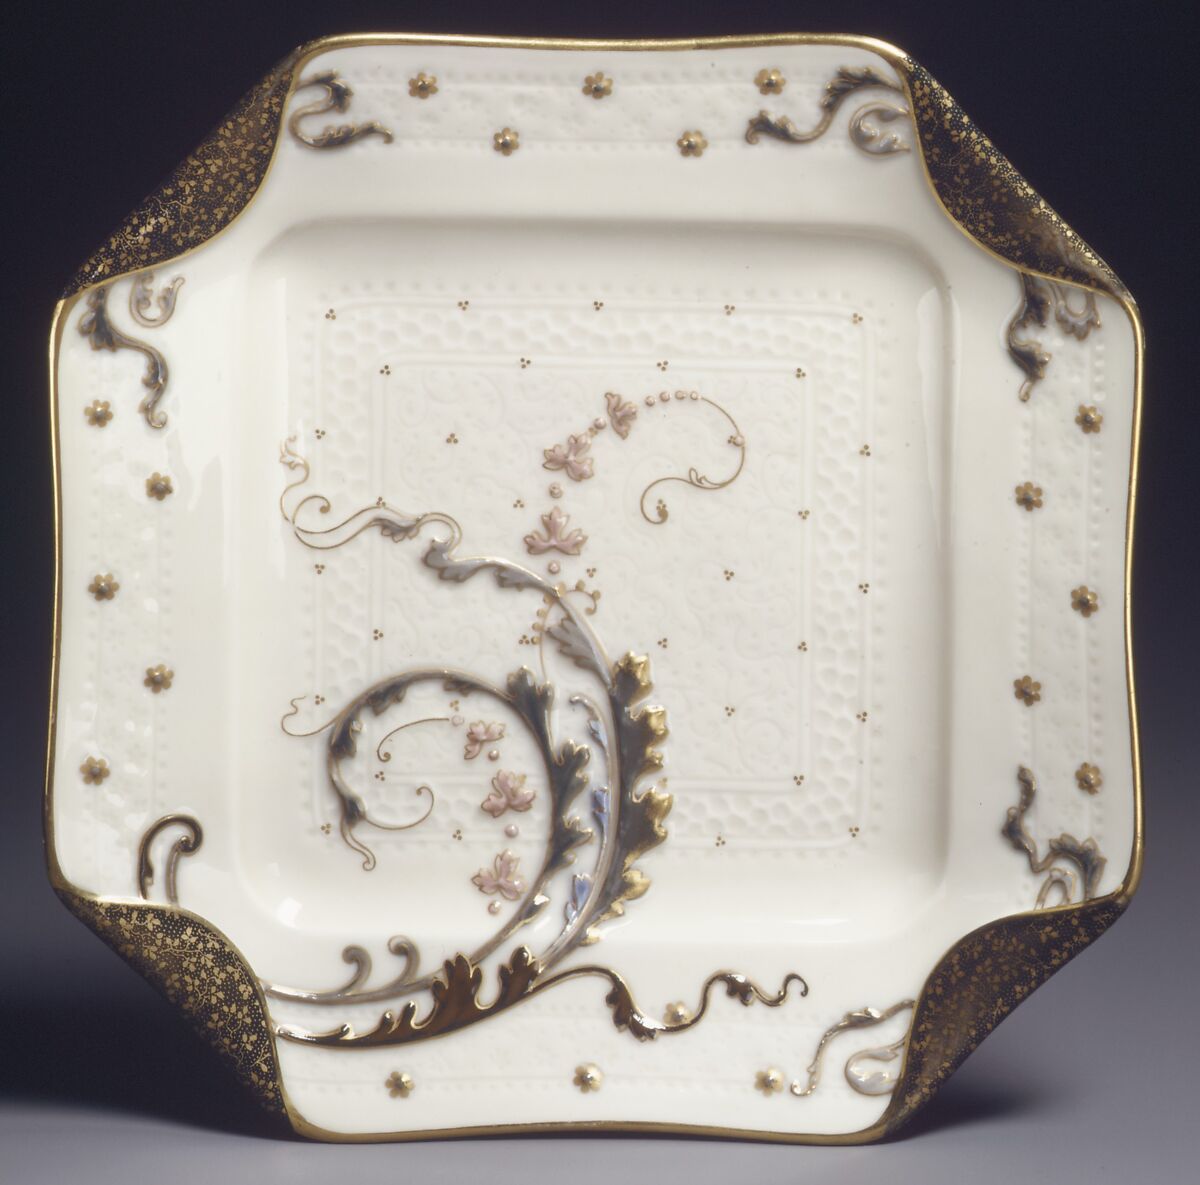 Dish, Design attributed to Albert-Louis Dammouse (French, Paris 1848–1926 Sèvres), Hard-paste porcelain, French, Limoges 